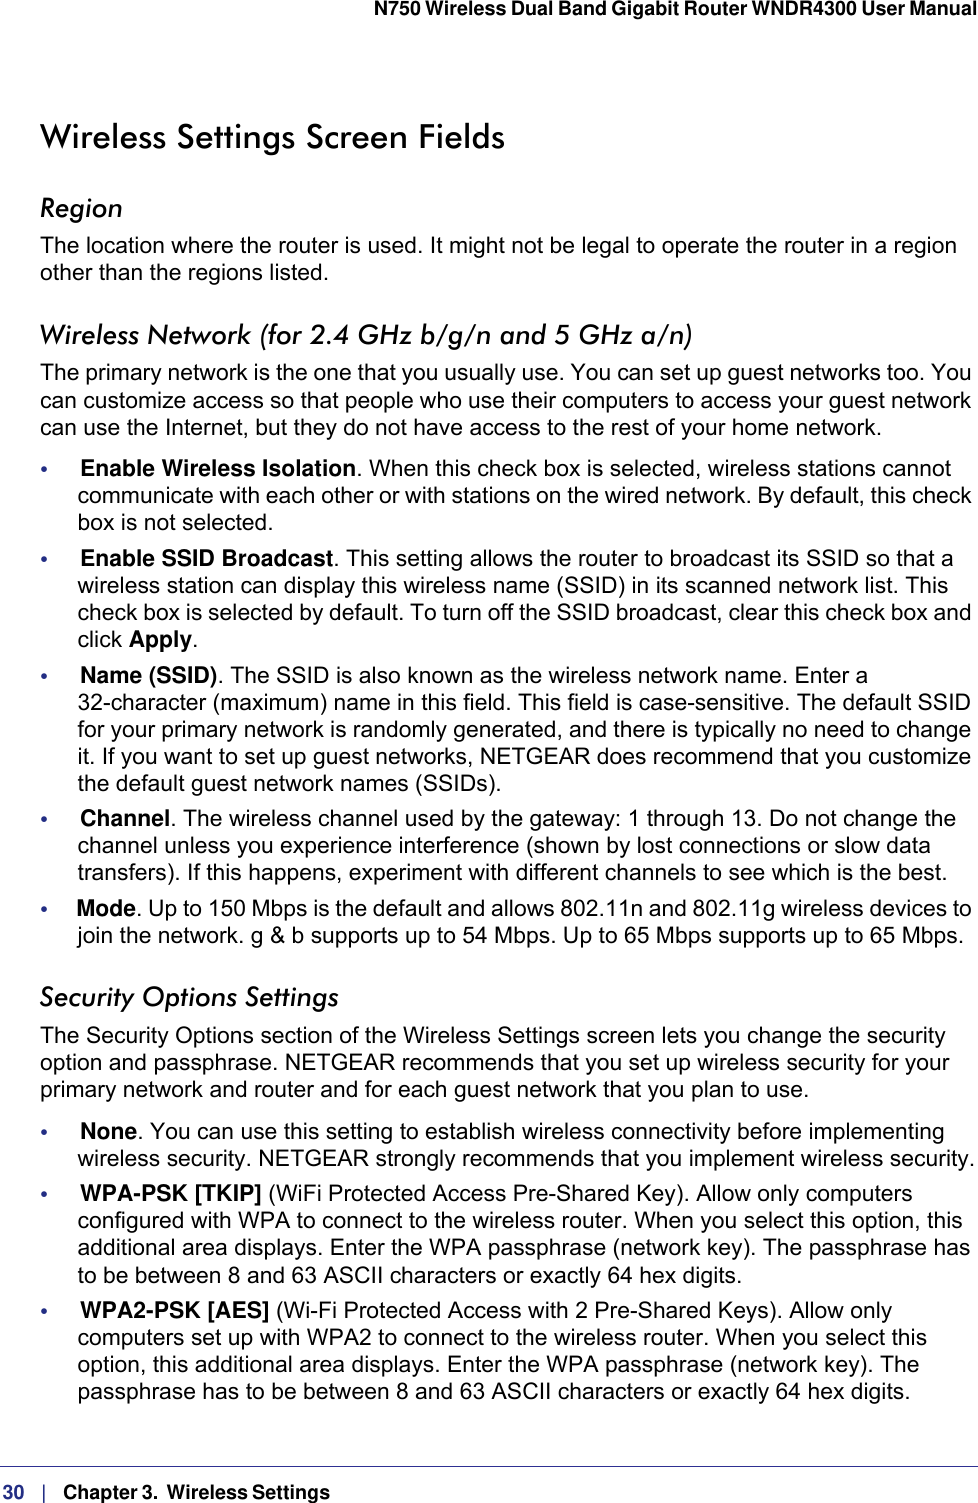 30   |   Chapter 3.  Wireless Settings  N750 Wireless Dual Band Gigabit Router WNDR4300 User Manual Wireless Settings Screen FieldsRegionThe location where the router is used. It might not be legal to operate the router in a region other than the regions listed.Wireless Network (for 2.4 GHz b/g/n and 5 GHz a/n)The primary network is the one that you usually use. You can set up guest networks too. You can customize access so that people who use their computers to access your guest network can use the Internet, but they do not have access to the rest of your home network. •     Enable Wireless Isolation. When this check box is selected, wireless stations cannot communicate with each other or with stations on the wired network. By default, this check box is not selected.•     Enable SSID Broadcast. This setting allows the router to broadcast its SSID so that a wireless station can display this wireless name (SSID) in its scanned network list. This check box is selected by default. To turn off the SSID broadcast, clear this check box and click Apply.•     Name (SSID). The SSID is also known as the wireless network name. Enter a 32-character (maximum) name in this field. This field is case-sensitive. The default SSID for your primary network is randomly generated, and there is typically no need to change it. If you want to set up guest networks, NETGEAR does recommend that you customize the default guest network names (SSIDs).•     Channel. The wireless channel used by the gateway: 1 through 13. Do not change the channel unless you experience interference (shown by lost connections or slow data transfers). If this happens, experiment with different channels to see which is the best.•     Mode. Up to 150 Mbps is the default and allows 802.11n and 802.11g wireless devices to join the network. g &amp; b supports up to 54 Mbps. Up to 65 Mbps supports up to 65 Mbps.Security Options SettingsThe Security Options section of the Wireless Settings screen lets you change the security option and passphrase. NETGEAR recommends that you set up wireless security for your primary network and router and for each guest network that you plan to use. •     None. You can use this setting to establish wireless connectivity before implementing wireless security. NETGEAR strongly recommends that you implement wireless security.•     WPA-PSK [TKIP] (WiFi Protected Access Pre-Shared Key). Allow only computers configured with WPA to connect to the wireless router. When you select this option, this additional area displays. Enter the WPA passphrase (network key). The passphrase has to be between 8 and 63 ASCII characters or exactly 64 hex digits.•     WPA2-PSK [AES] (Wi-Fi Protected Access with 2 Pre-Shared Keys). Allow only computers set up with WPA2 to connect to the wireless router. When you select this option, this additional area displays. Enter the WPA passphrase (network key). The passphrase has to be between 8 and 63 ASCII characters or exactly 64 hex digits.